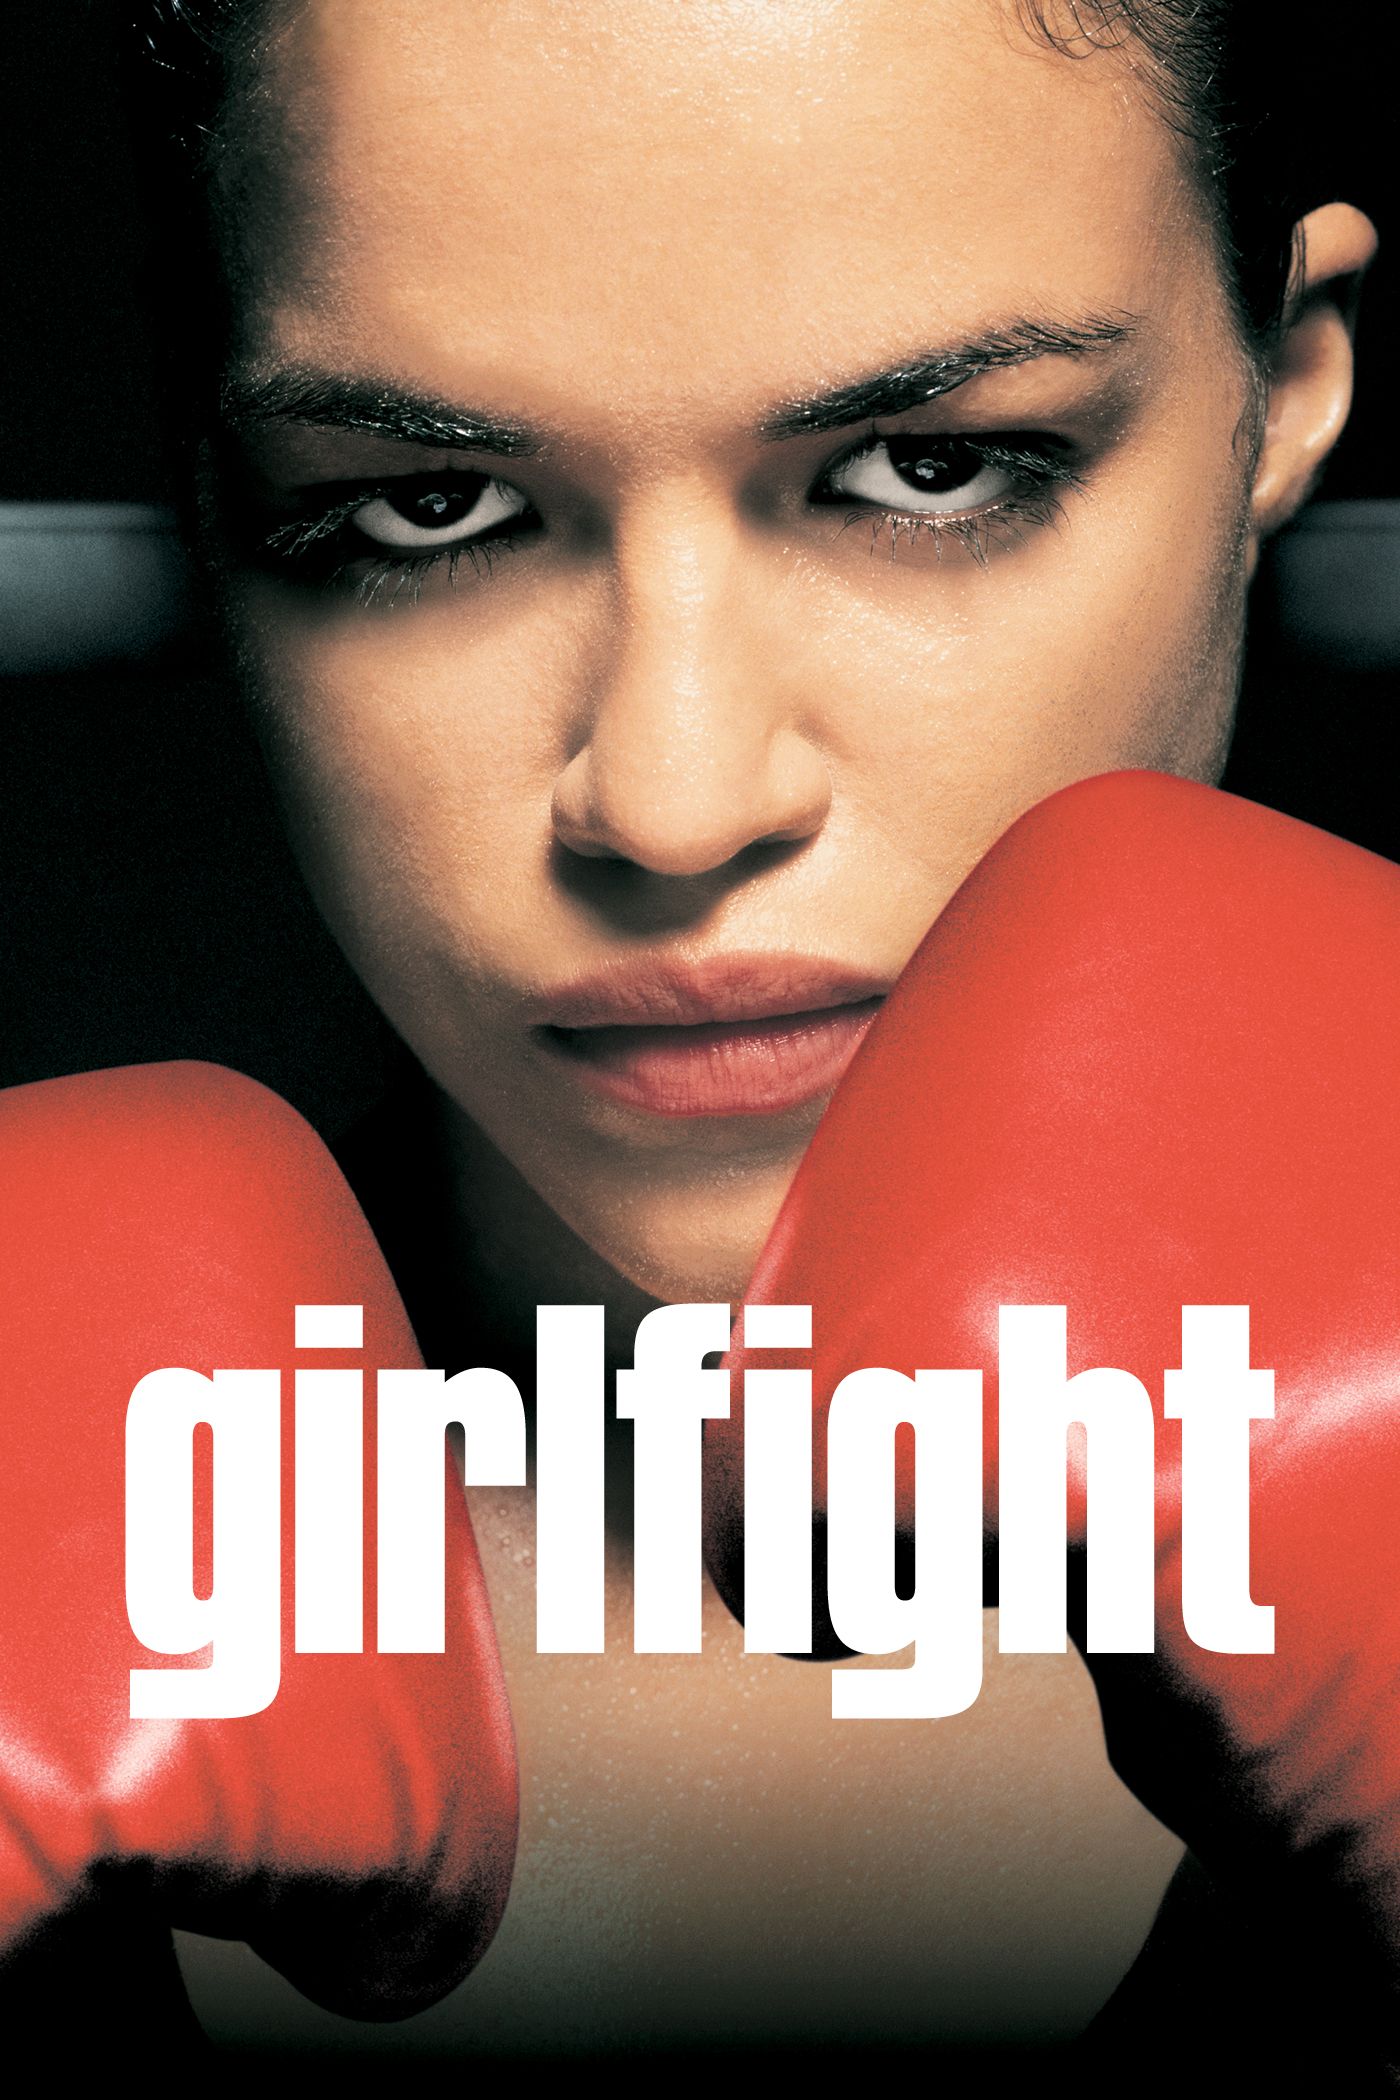 cosmin vacarescu recommends girlfight full movie online pic